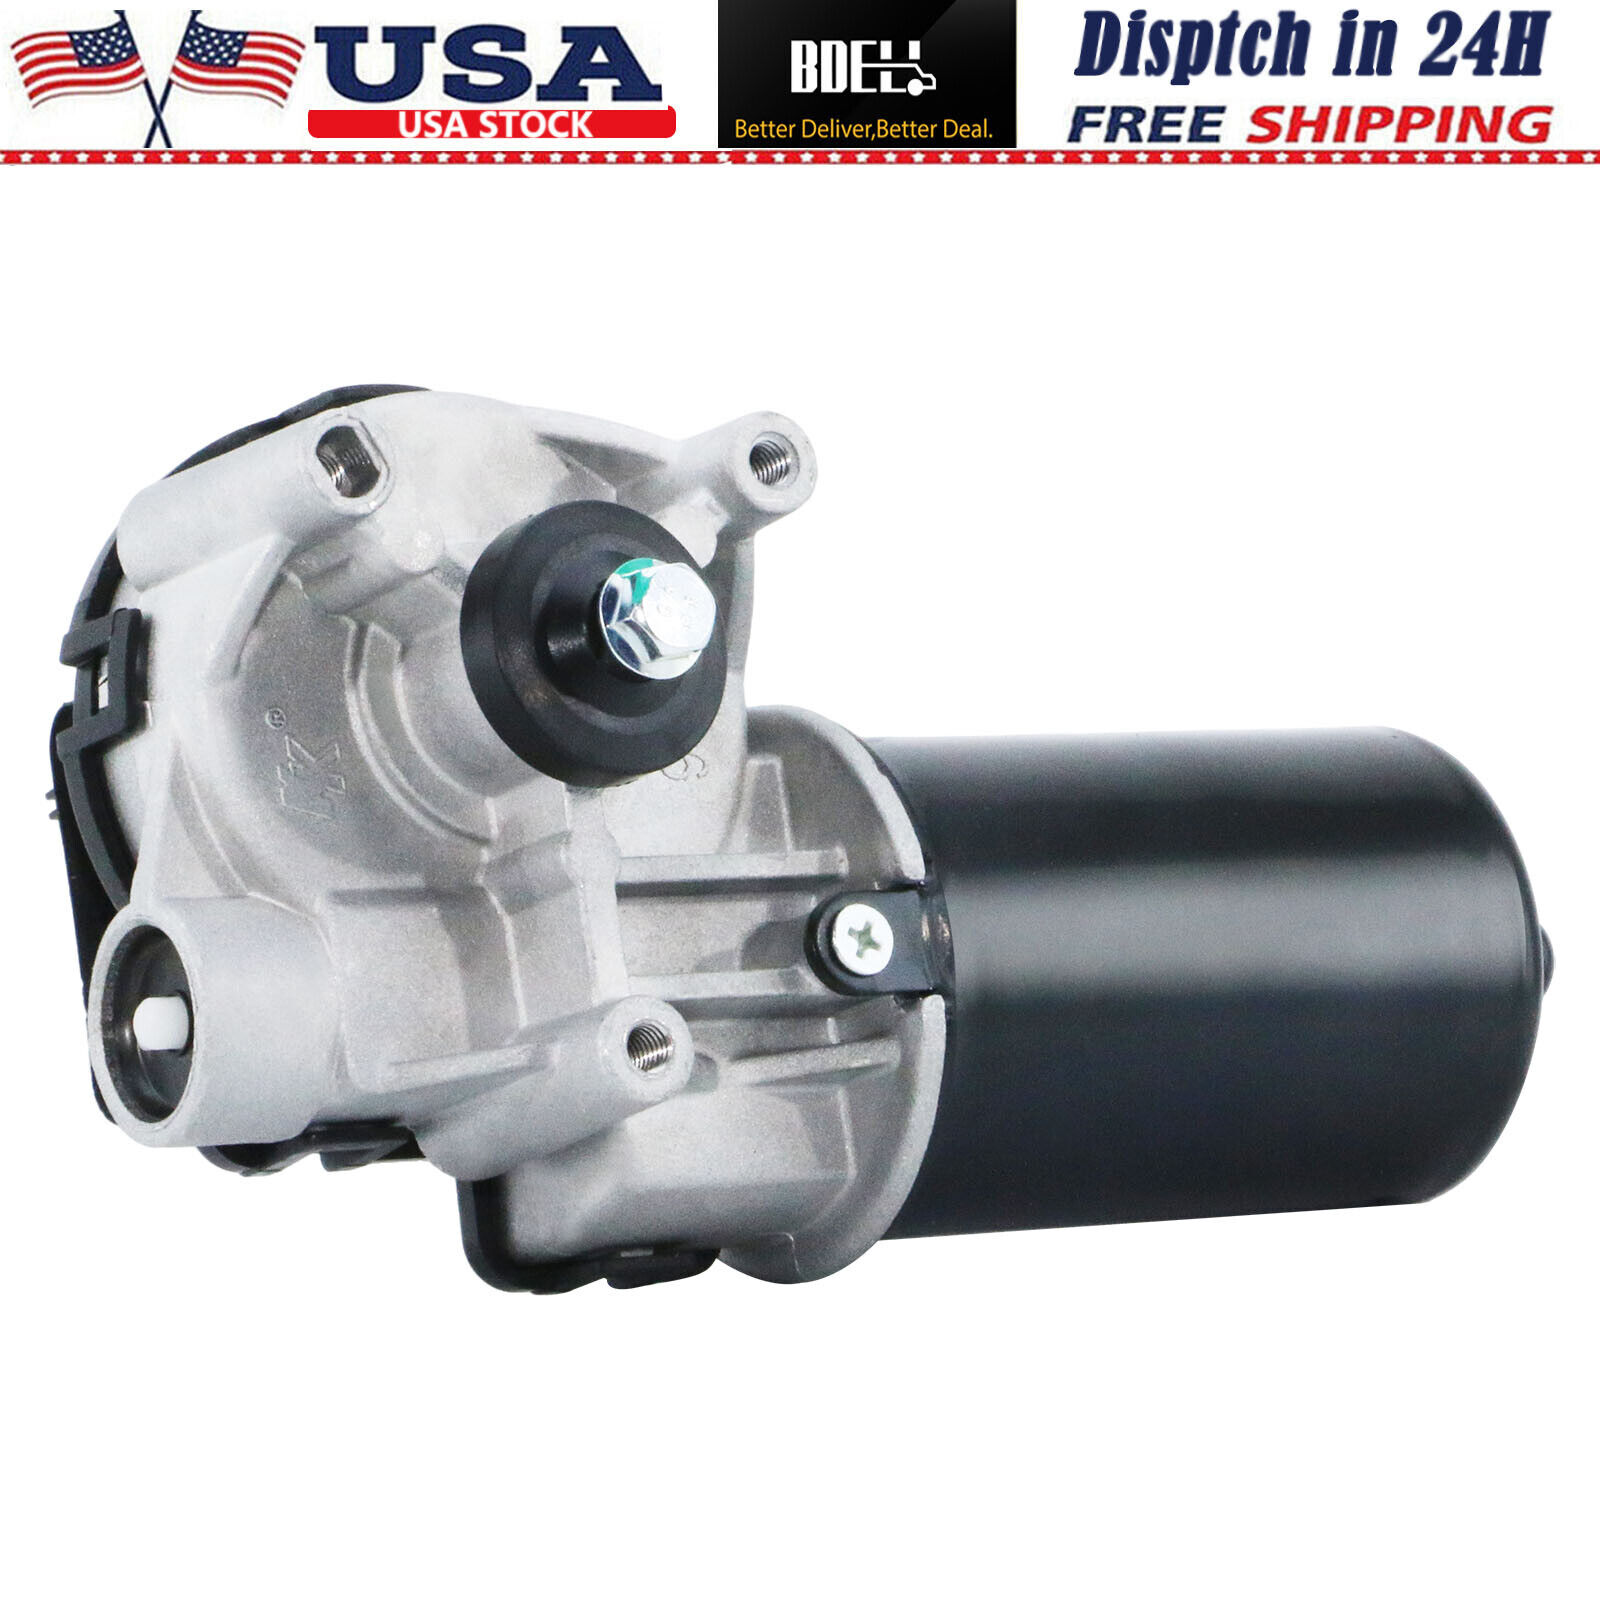 Windshield Wiper Motor Front for Ford F-150 Explorer F-250 Super Duty Lincoln